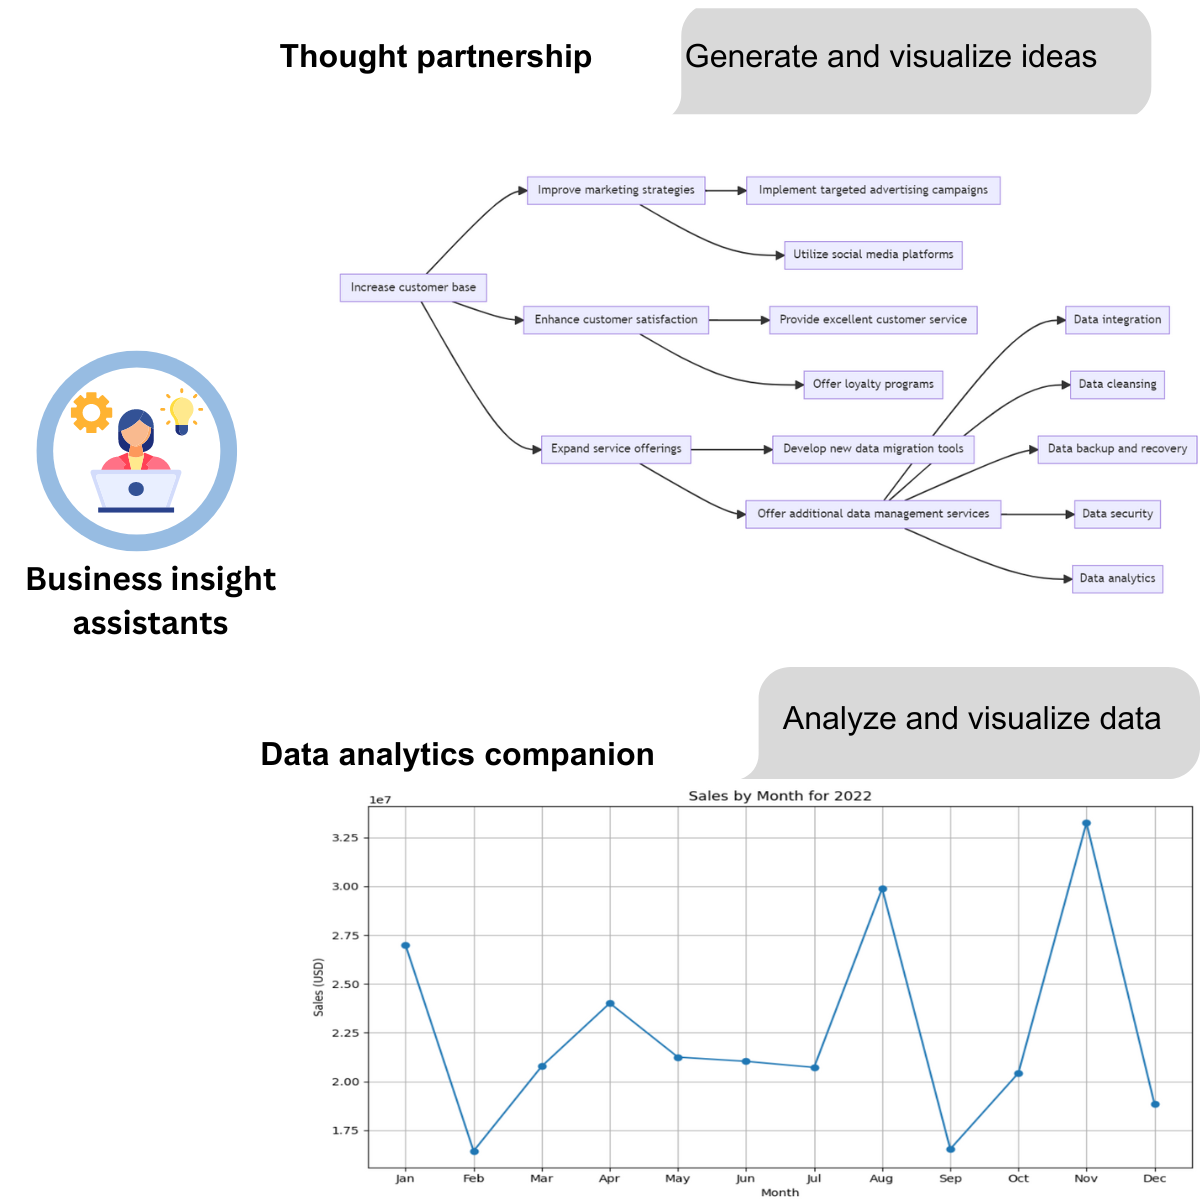 AI for business: ask documents, chat pdf, summarize and extract insights from vast documents and websites, analyze data, generate and visualize ideas